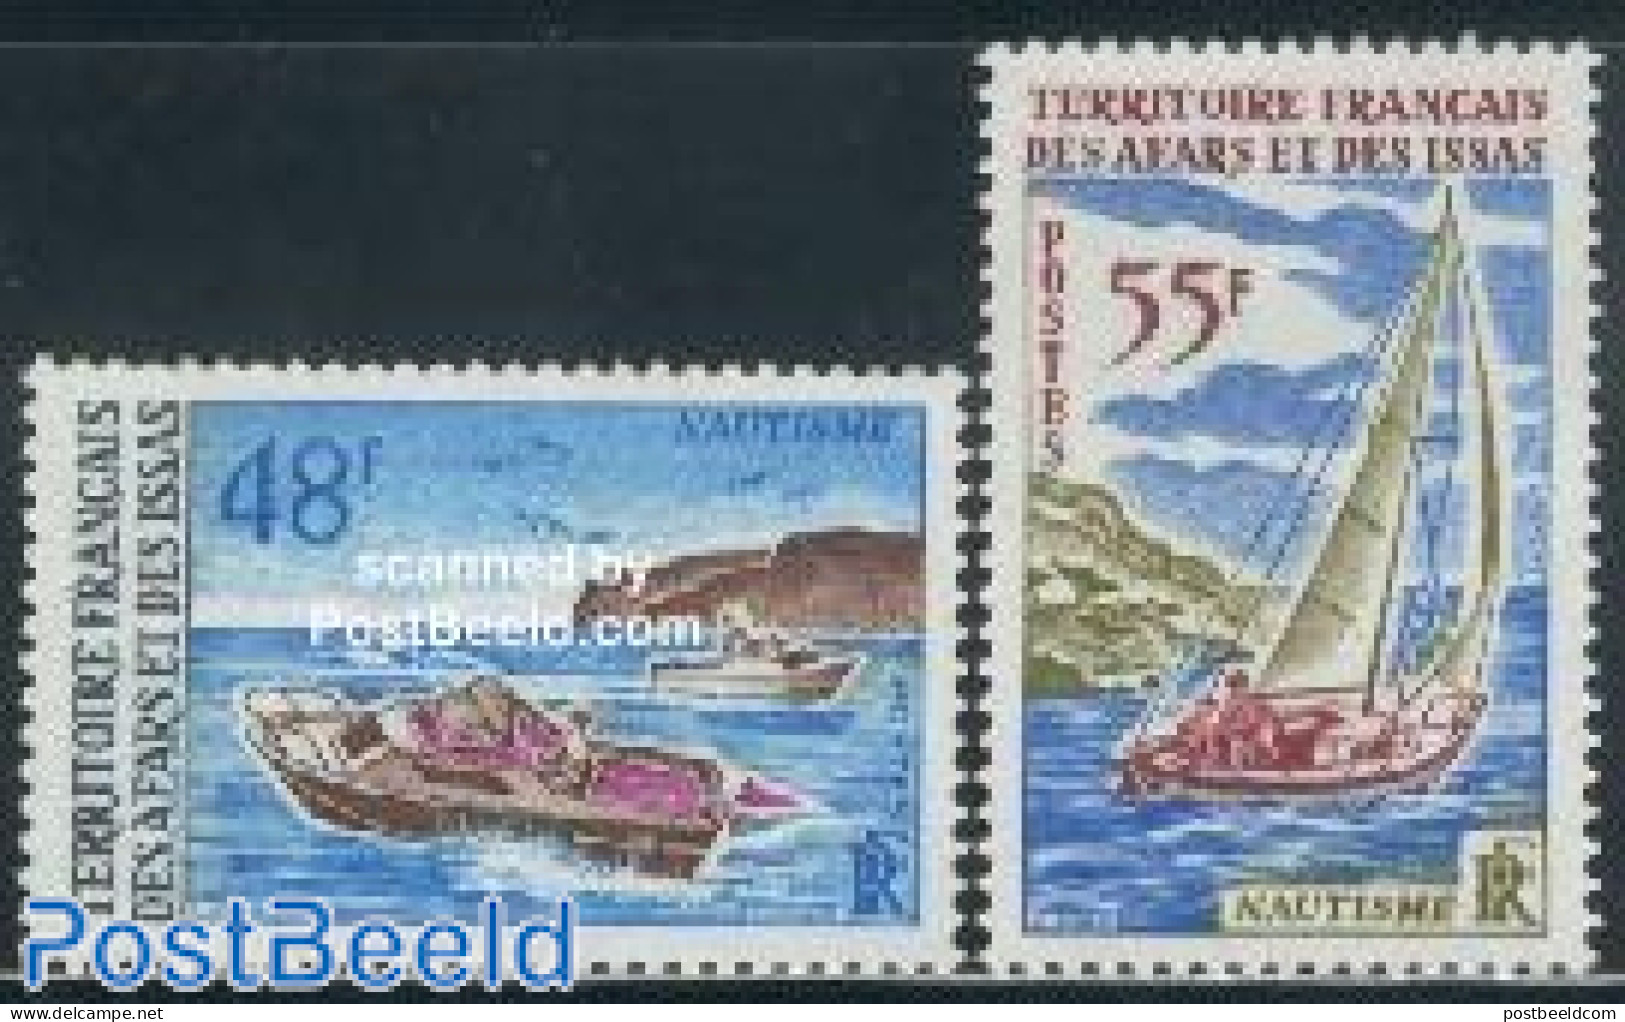 Afars And Issas 1970 Water Sports 2v, Mint NH, Sport - Transport - Sailing - Sport (other And Mixed) - Ships And Boats - Neufs